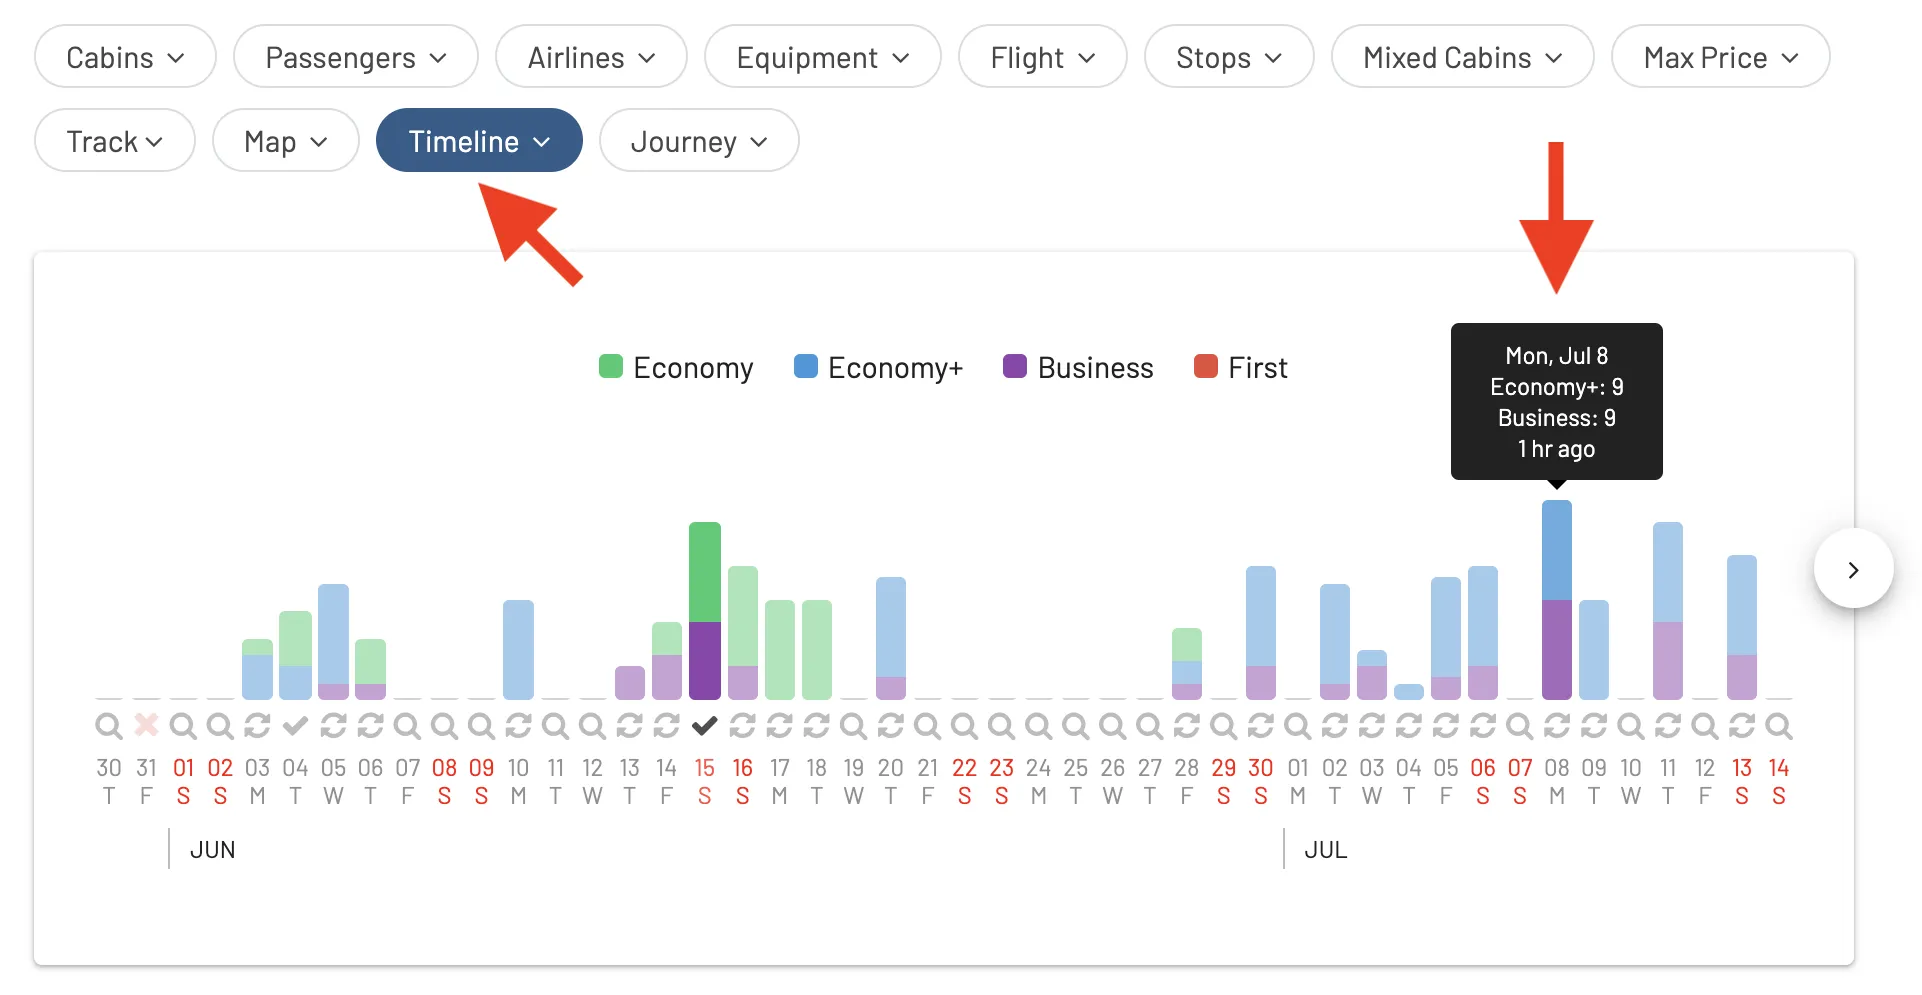 Search results for award flights on AwardFares (Timeline View).